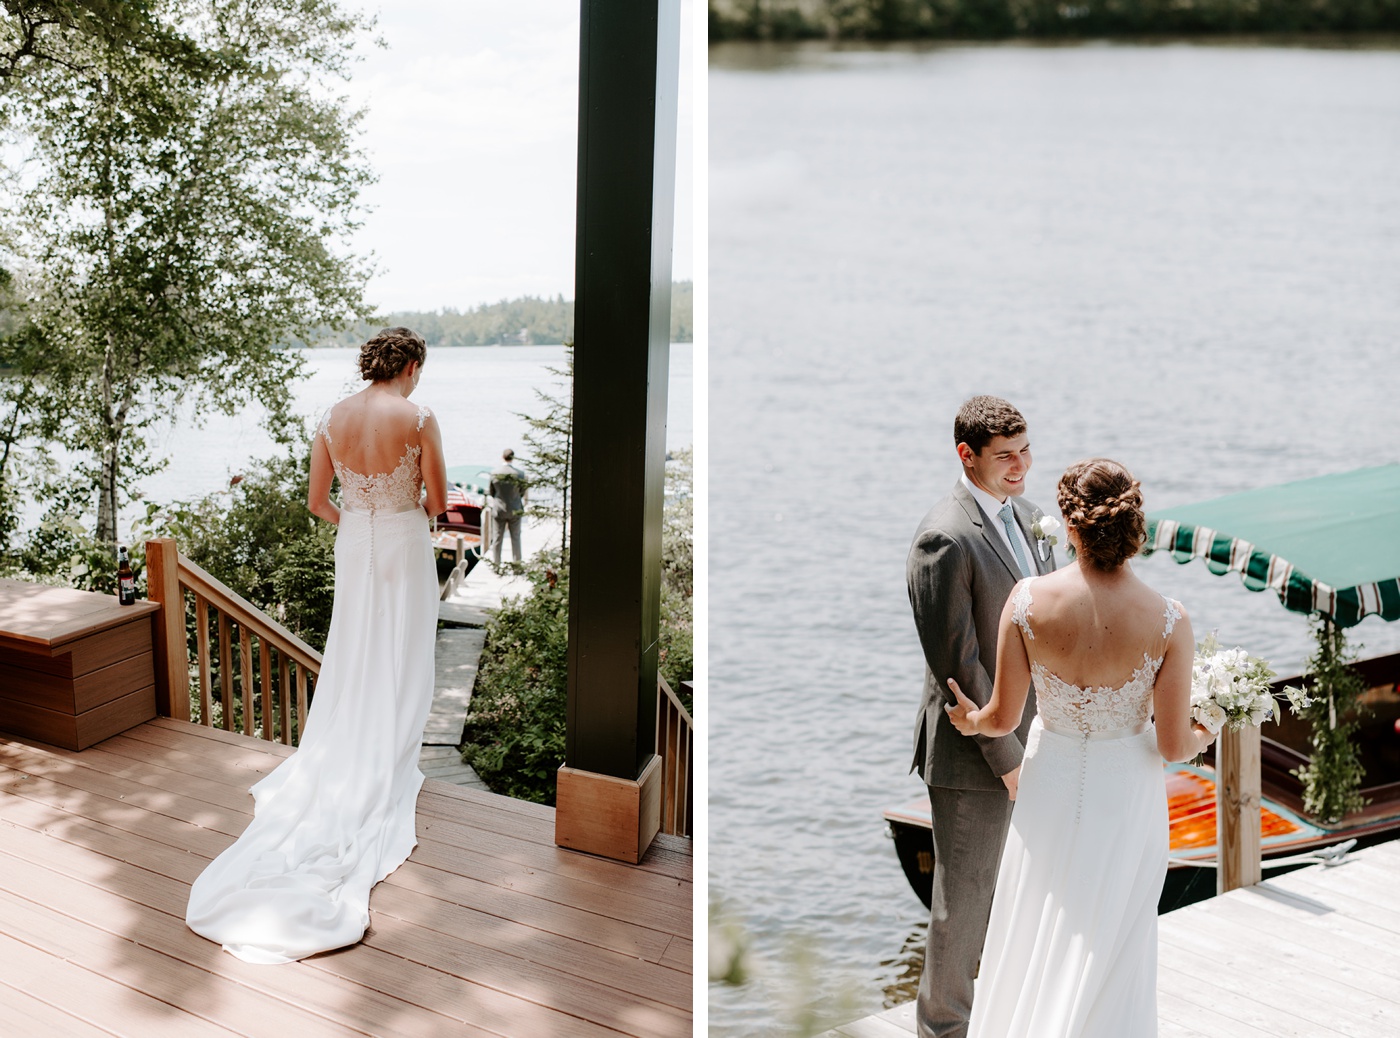 Bride and groom first look on the dock of a lake